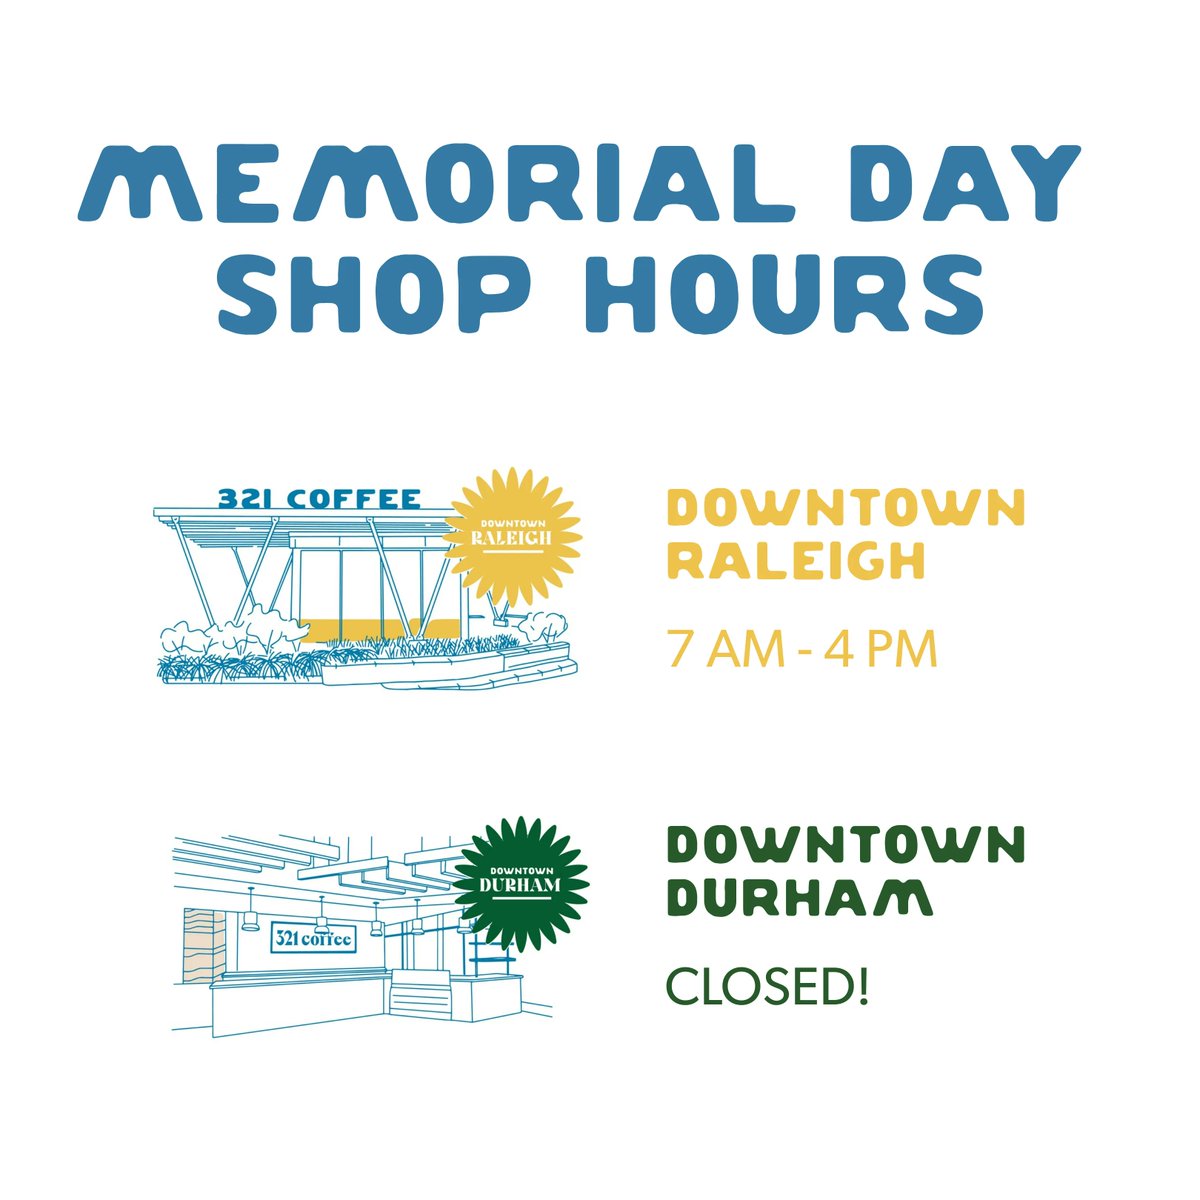 Memorial Day shop hours for tomorrow, May 29: 📍 Downtown Raleigh: 7 AM - 4 PM 📍 Downtown Durham: CLOSED! Join us in honoring and remembering all those who have served our country. We are grateful for your sacrifice. 🇺🇸